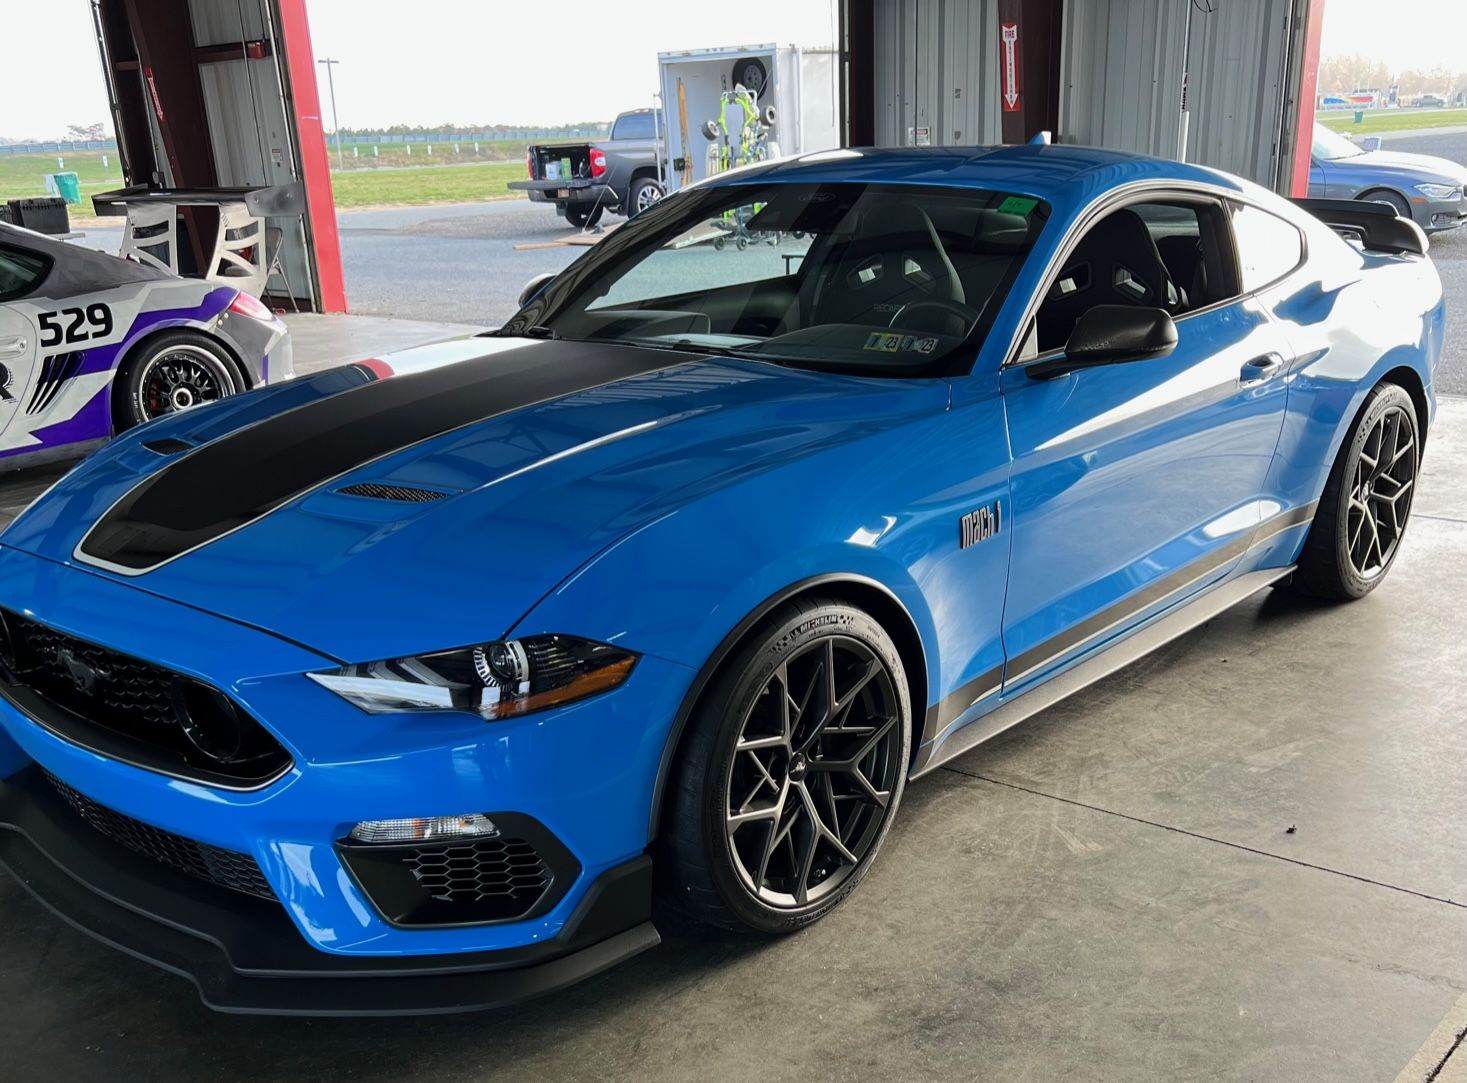 2022 Mustang Mach1 HPDE/Track - Profile: Mach 1 - TrackMustangsOnline ...